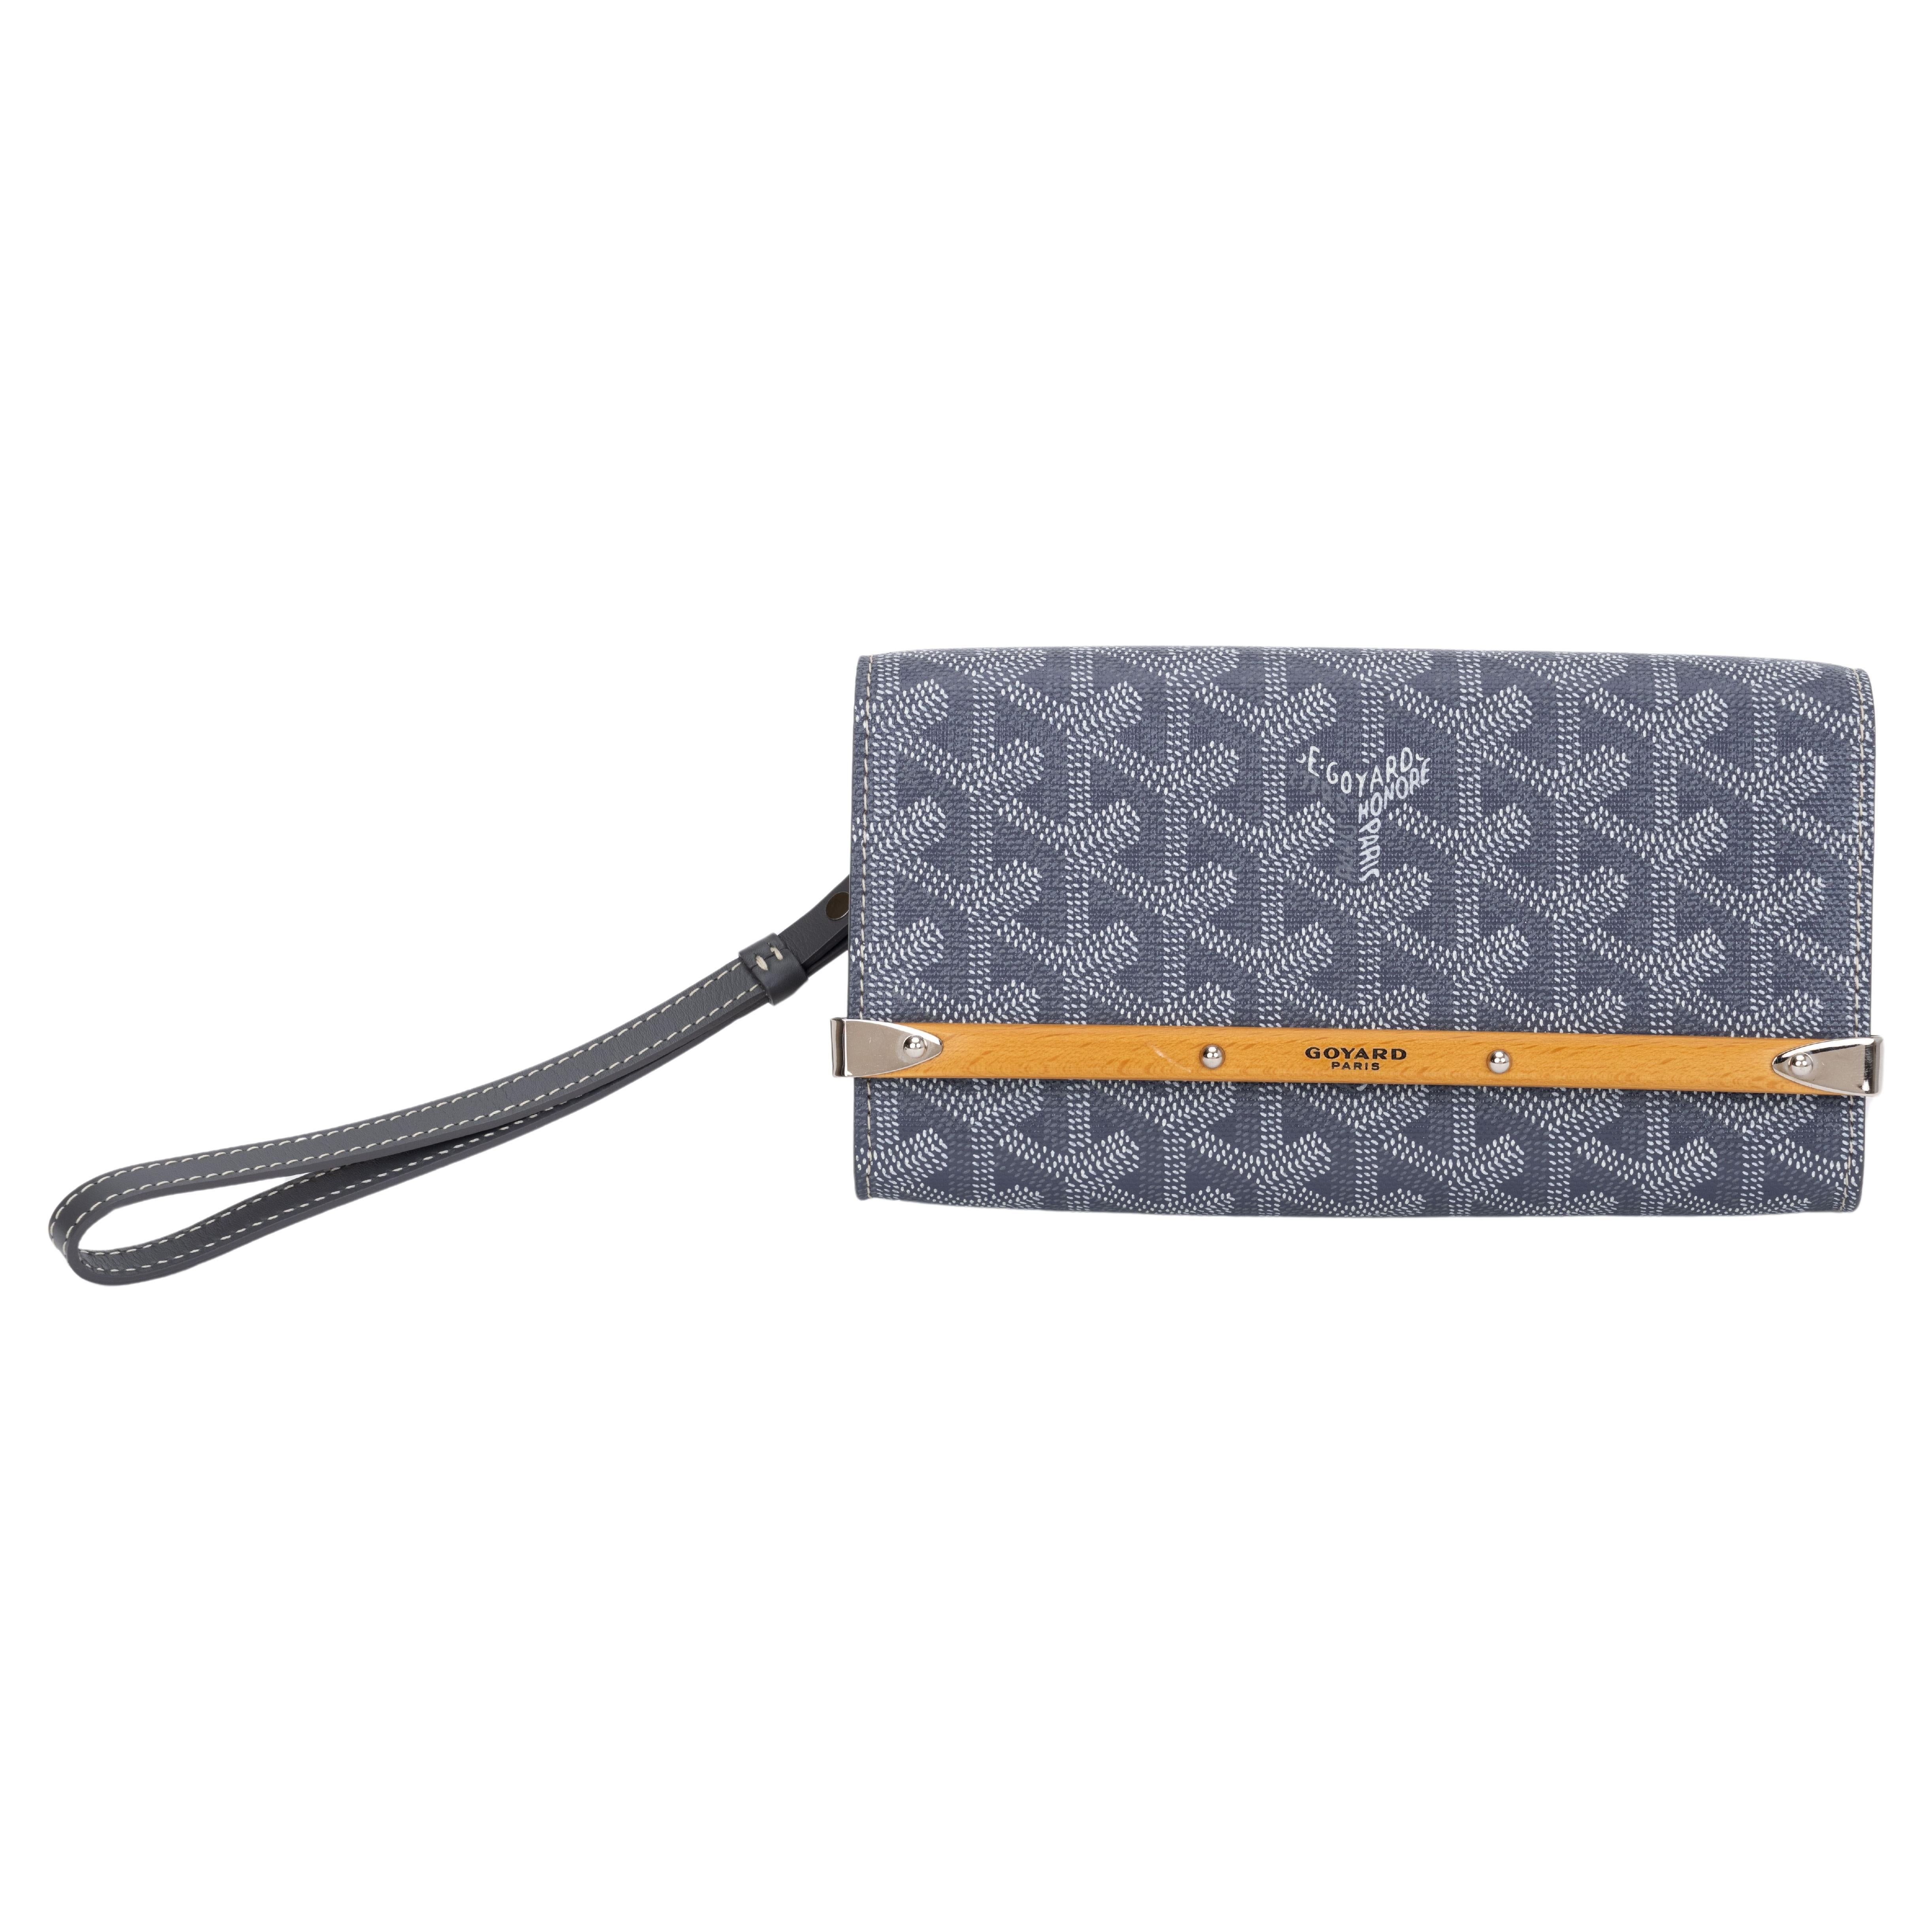 Maison Goyard - *Structured, yet light as a feather, urban